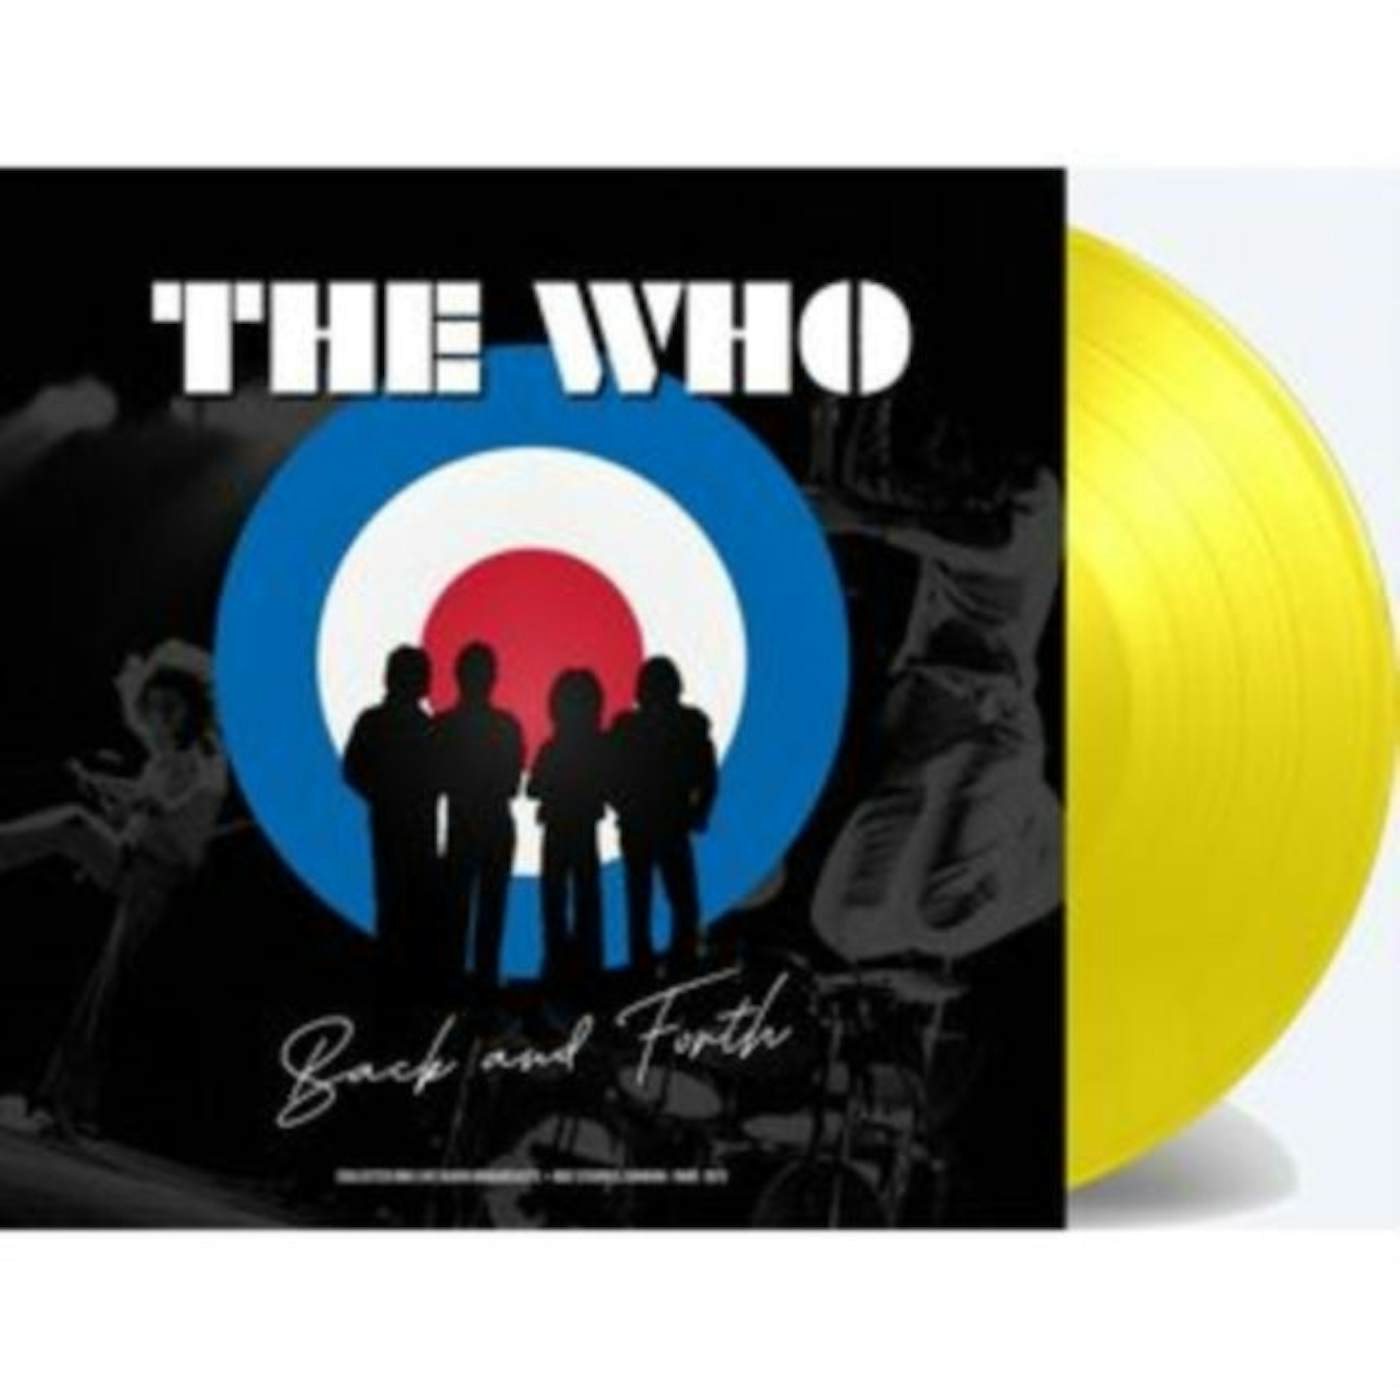 The Who LP - Back And Forth - Bbc Live At Bbc Studios. London (Special Edition) (Yellow Vinyl)